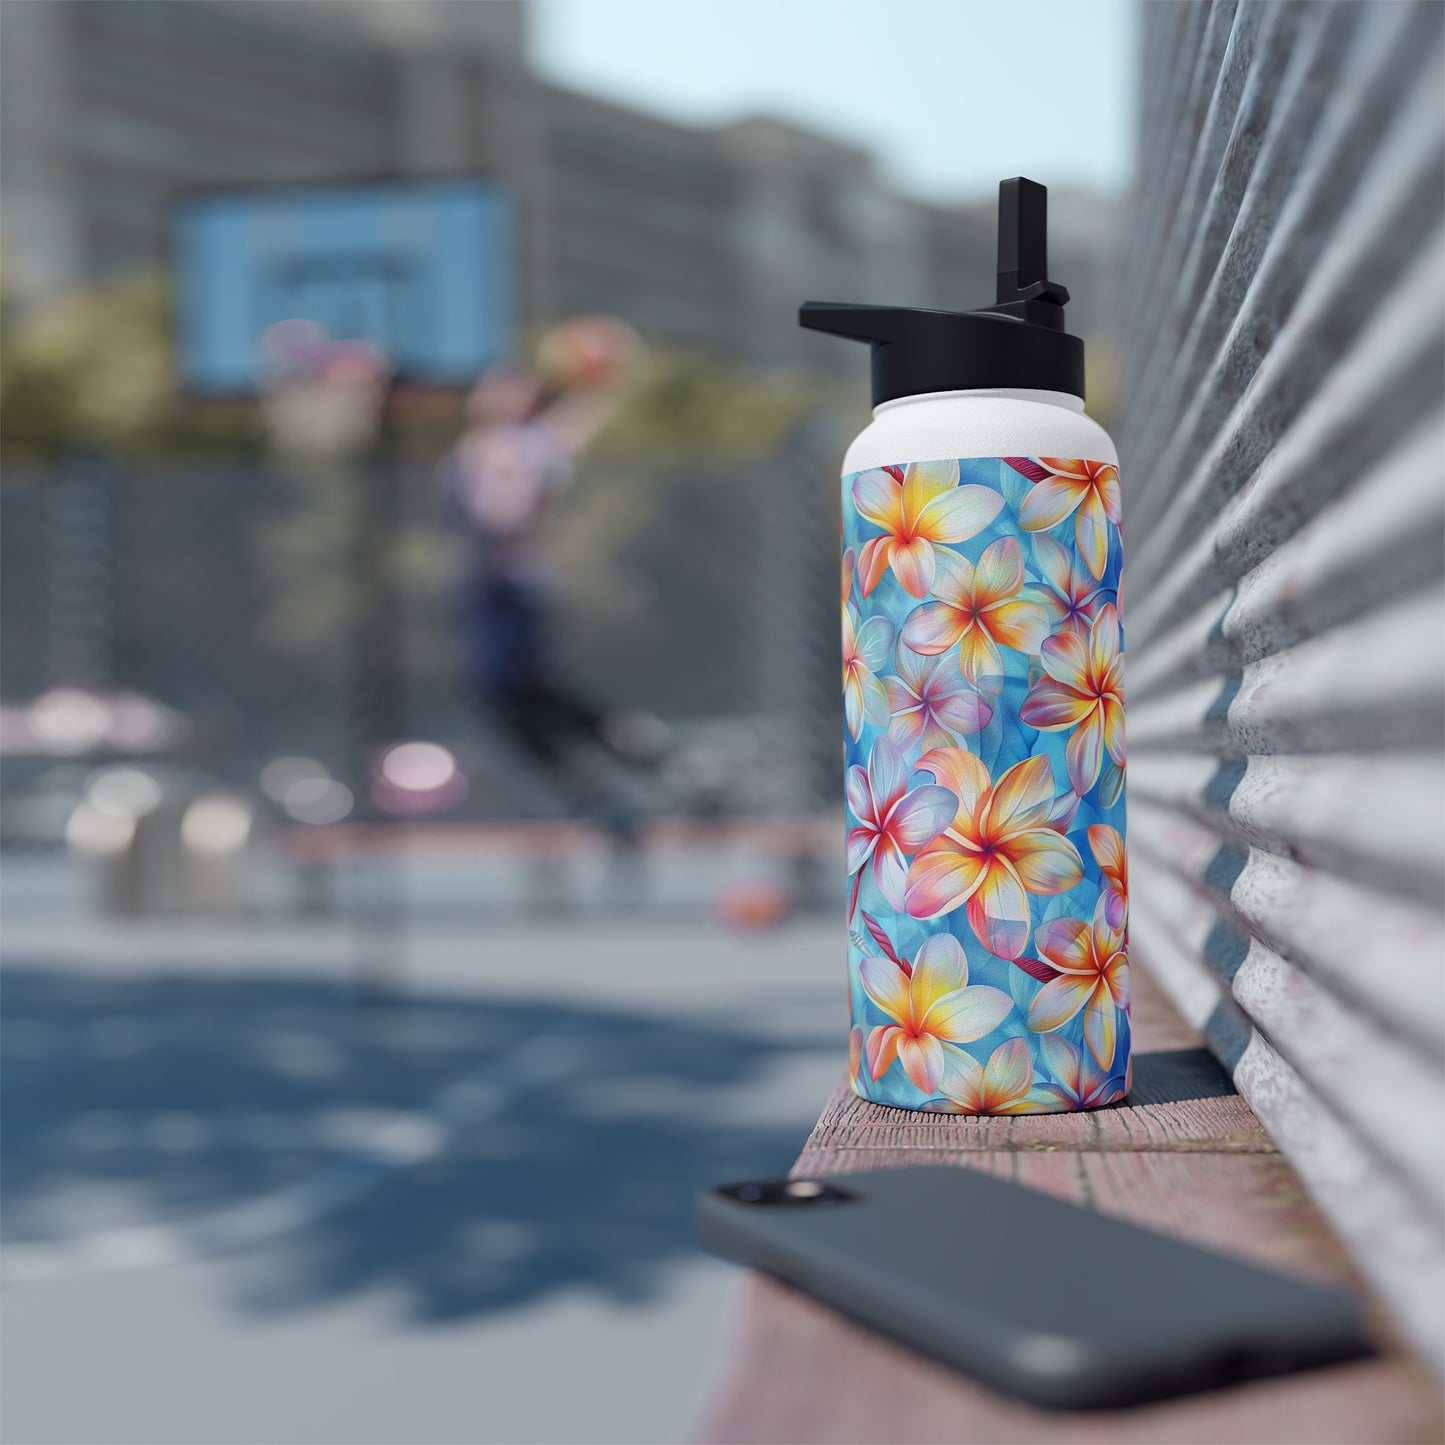 Stainless Steel Water Bottle Thermos, 32oz, Liberty Print Plumeria - Double Wall Insulation Keeps Drinks Hot or Cold